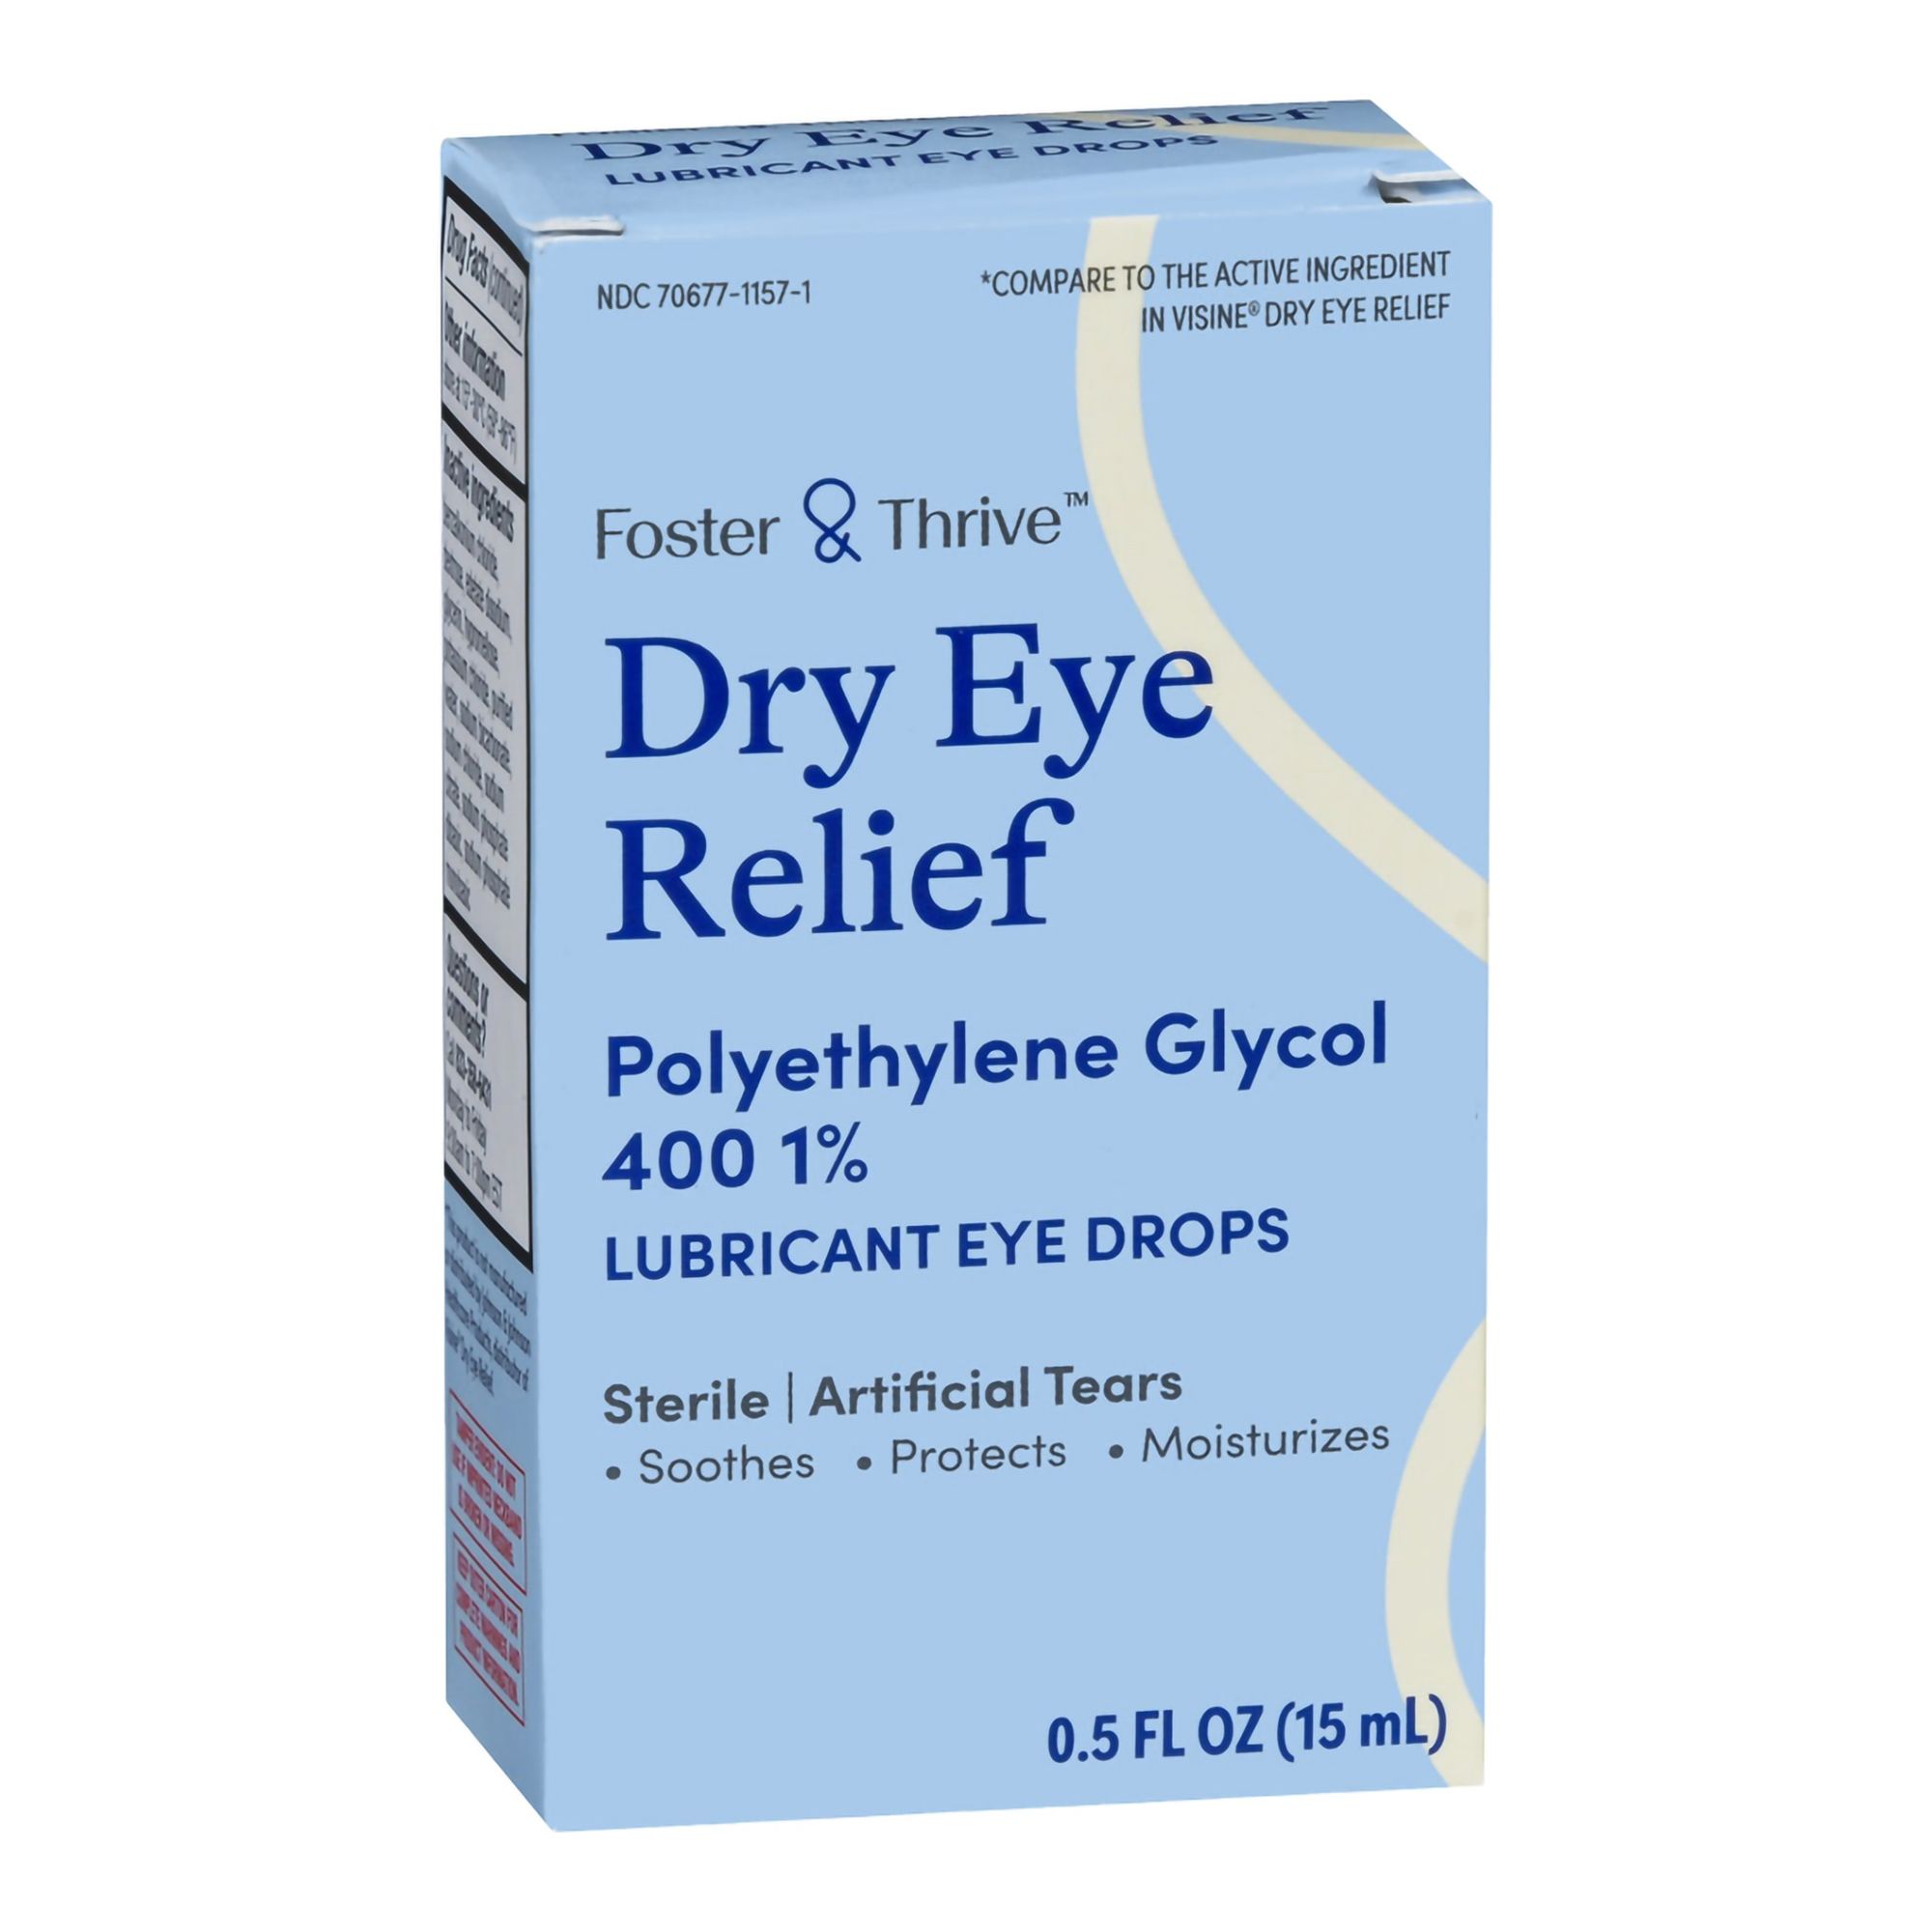 Foster & Thrive Dry Eye Relief Drops - 0.5 fl oz